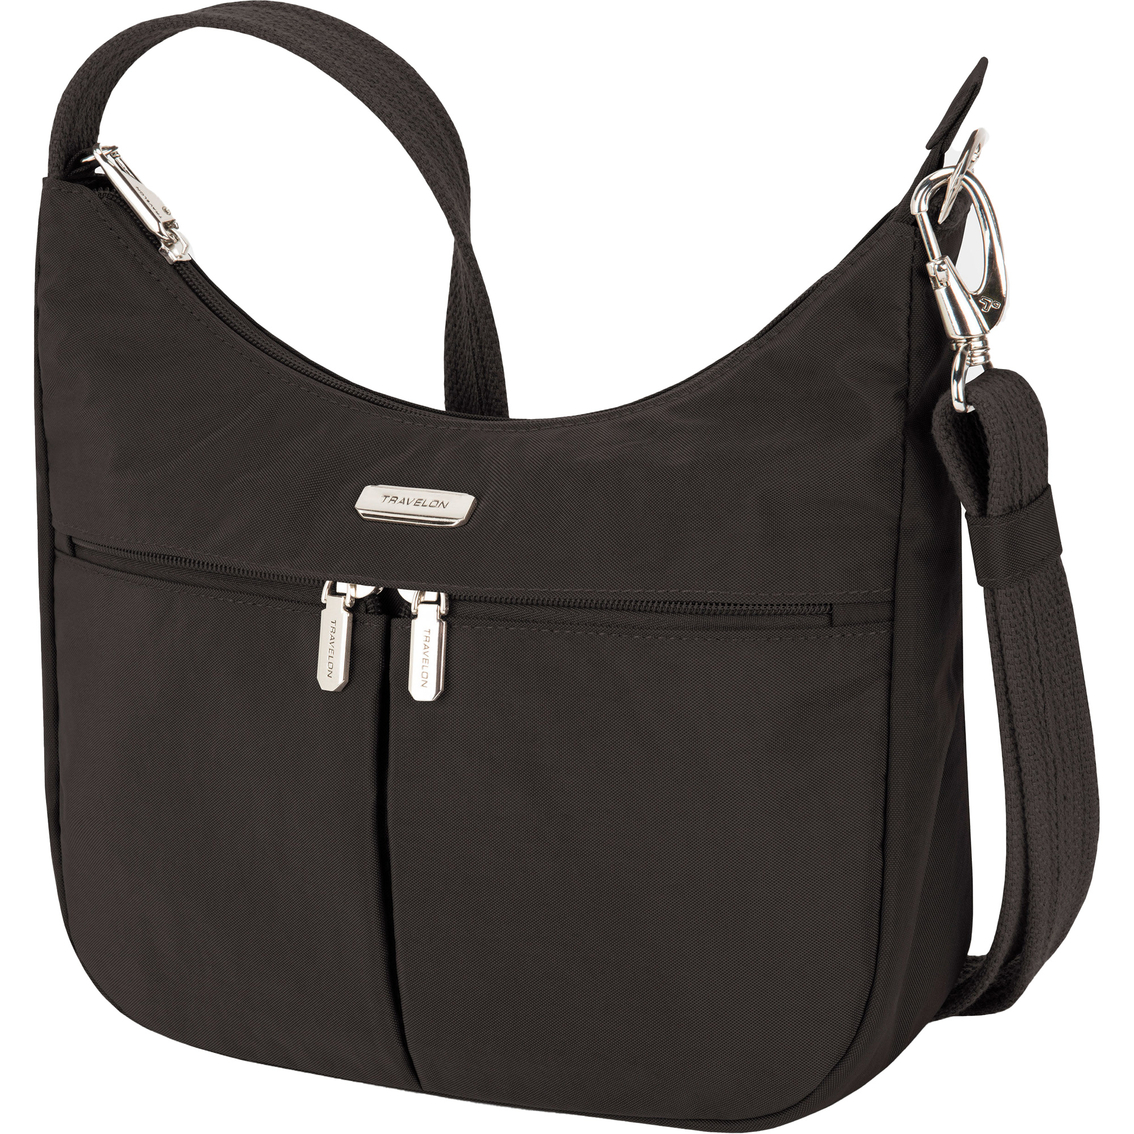 Travelon Anti Theft Essentials East/West Hobo Bag - Image 3 of 9